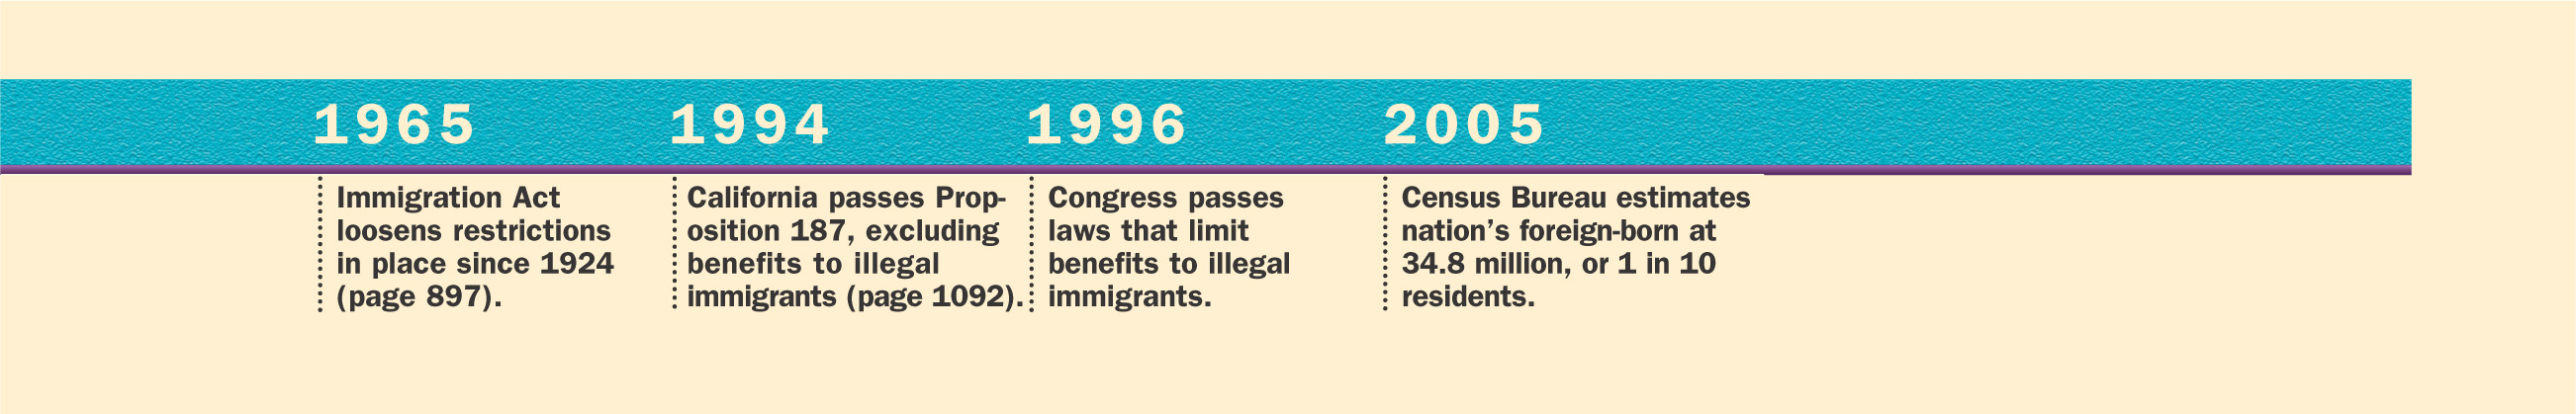 A timeline lists events in the history of U.S. immigration from 1751 to 2005.